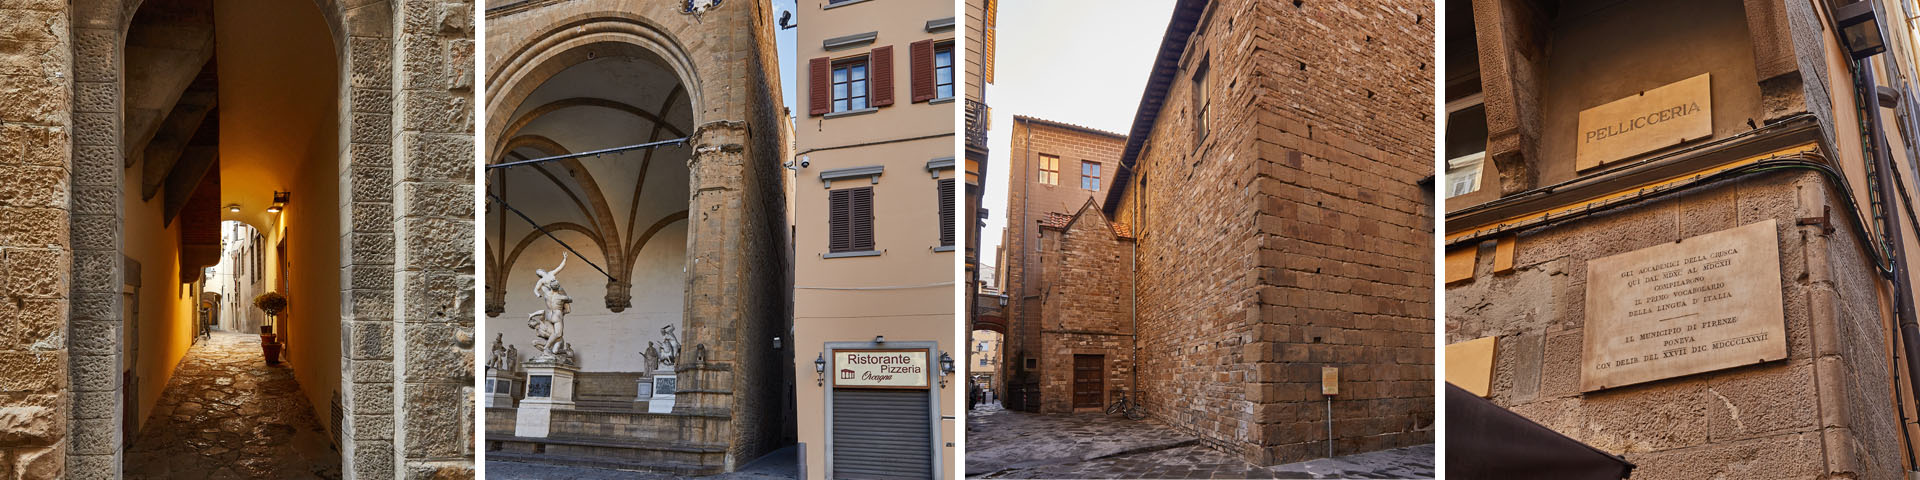 Places where Ser Piero da Vinci lived and worked